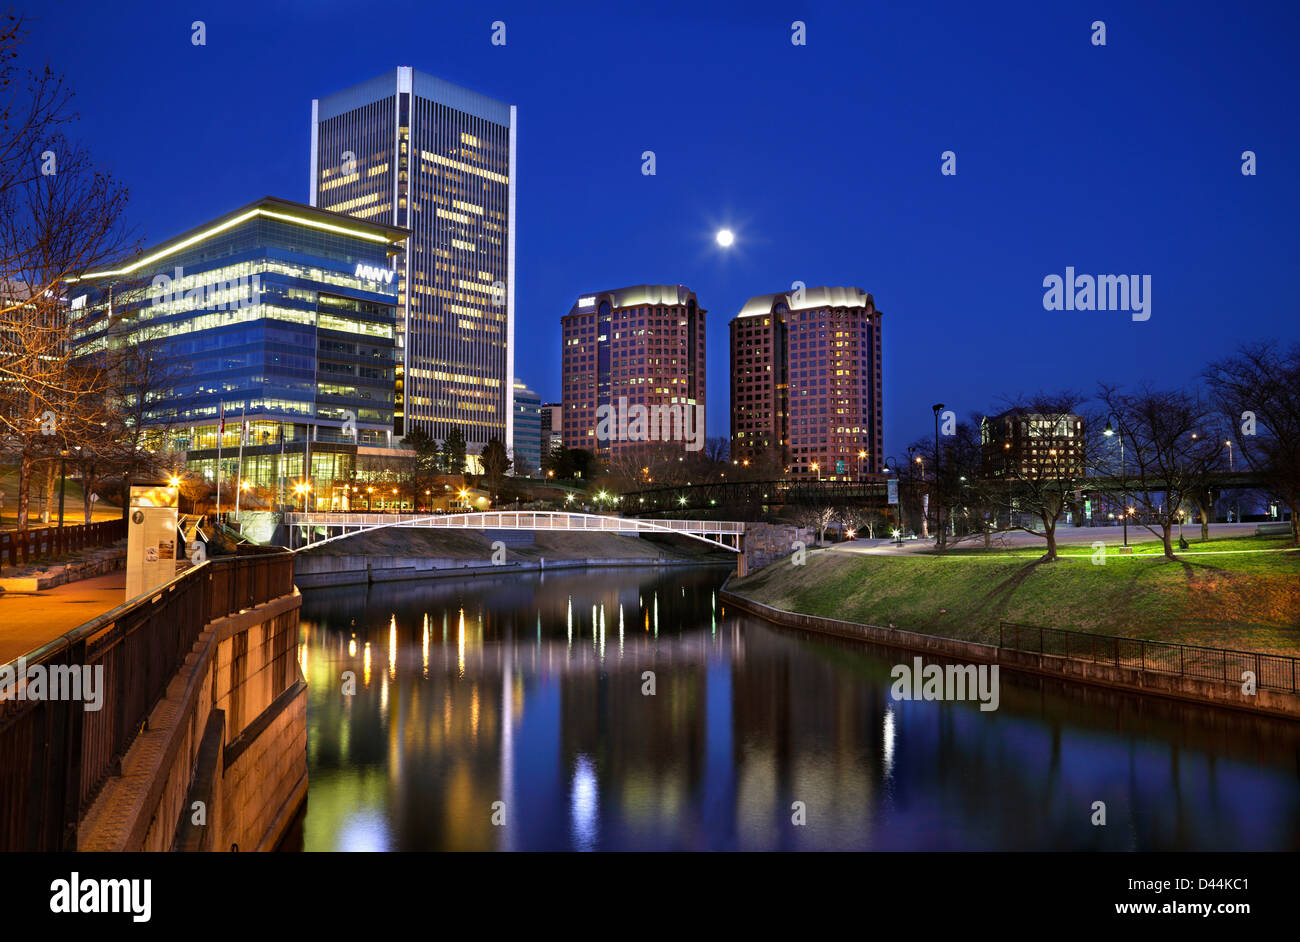 Richmond, Virginia, skyline at night. View over the Haxall Kanawha canal and the Canal Walk park on Brown's Island. Stock Photo